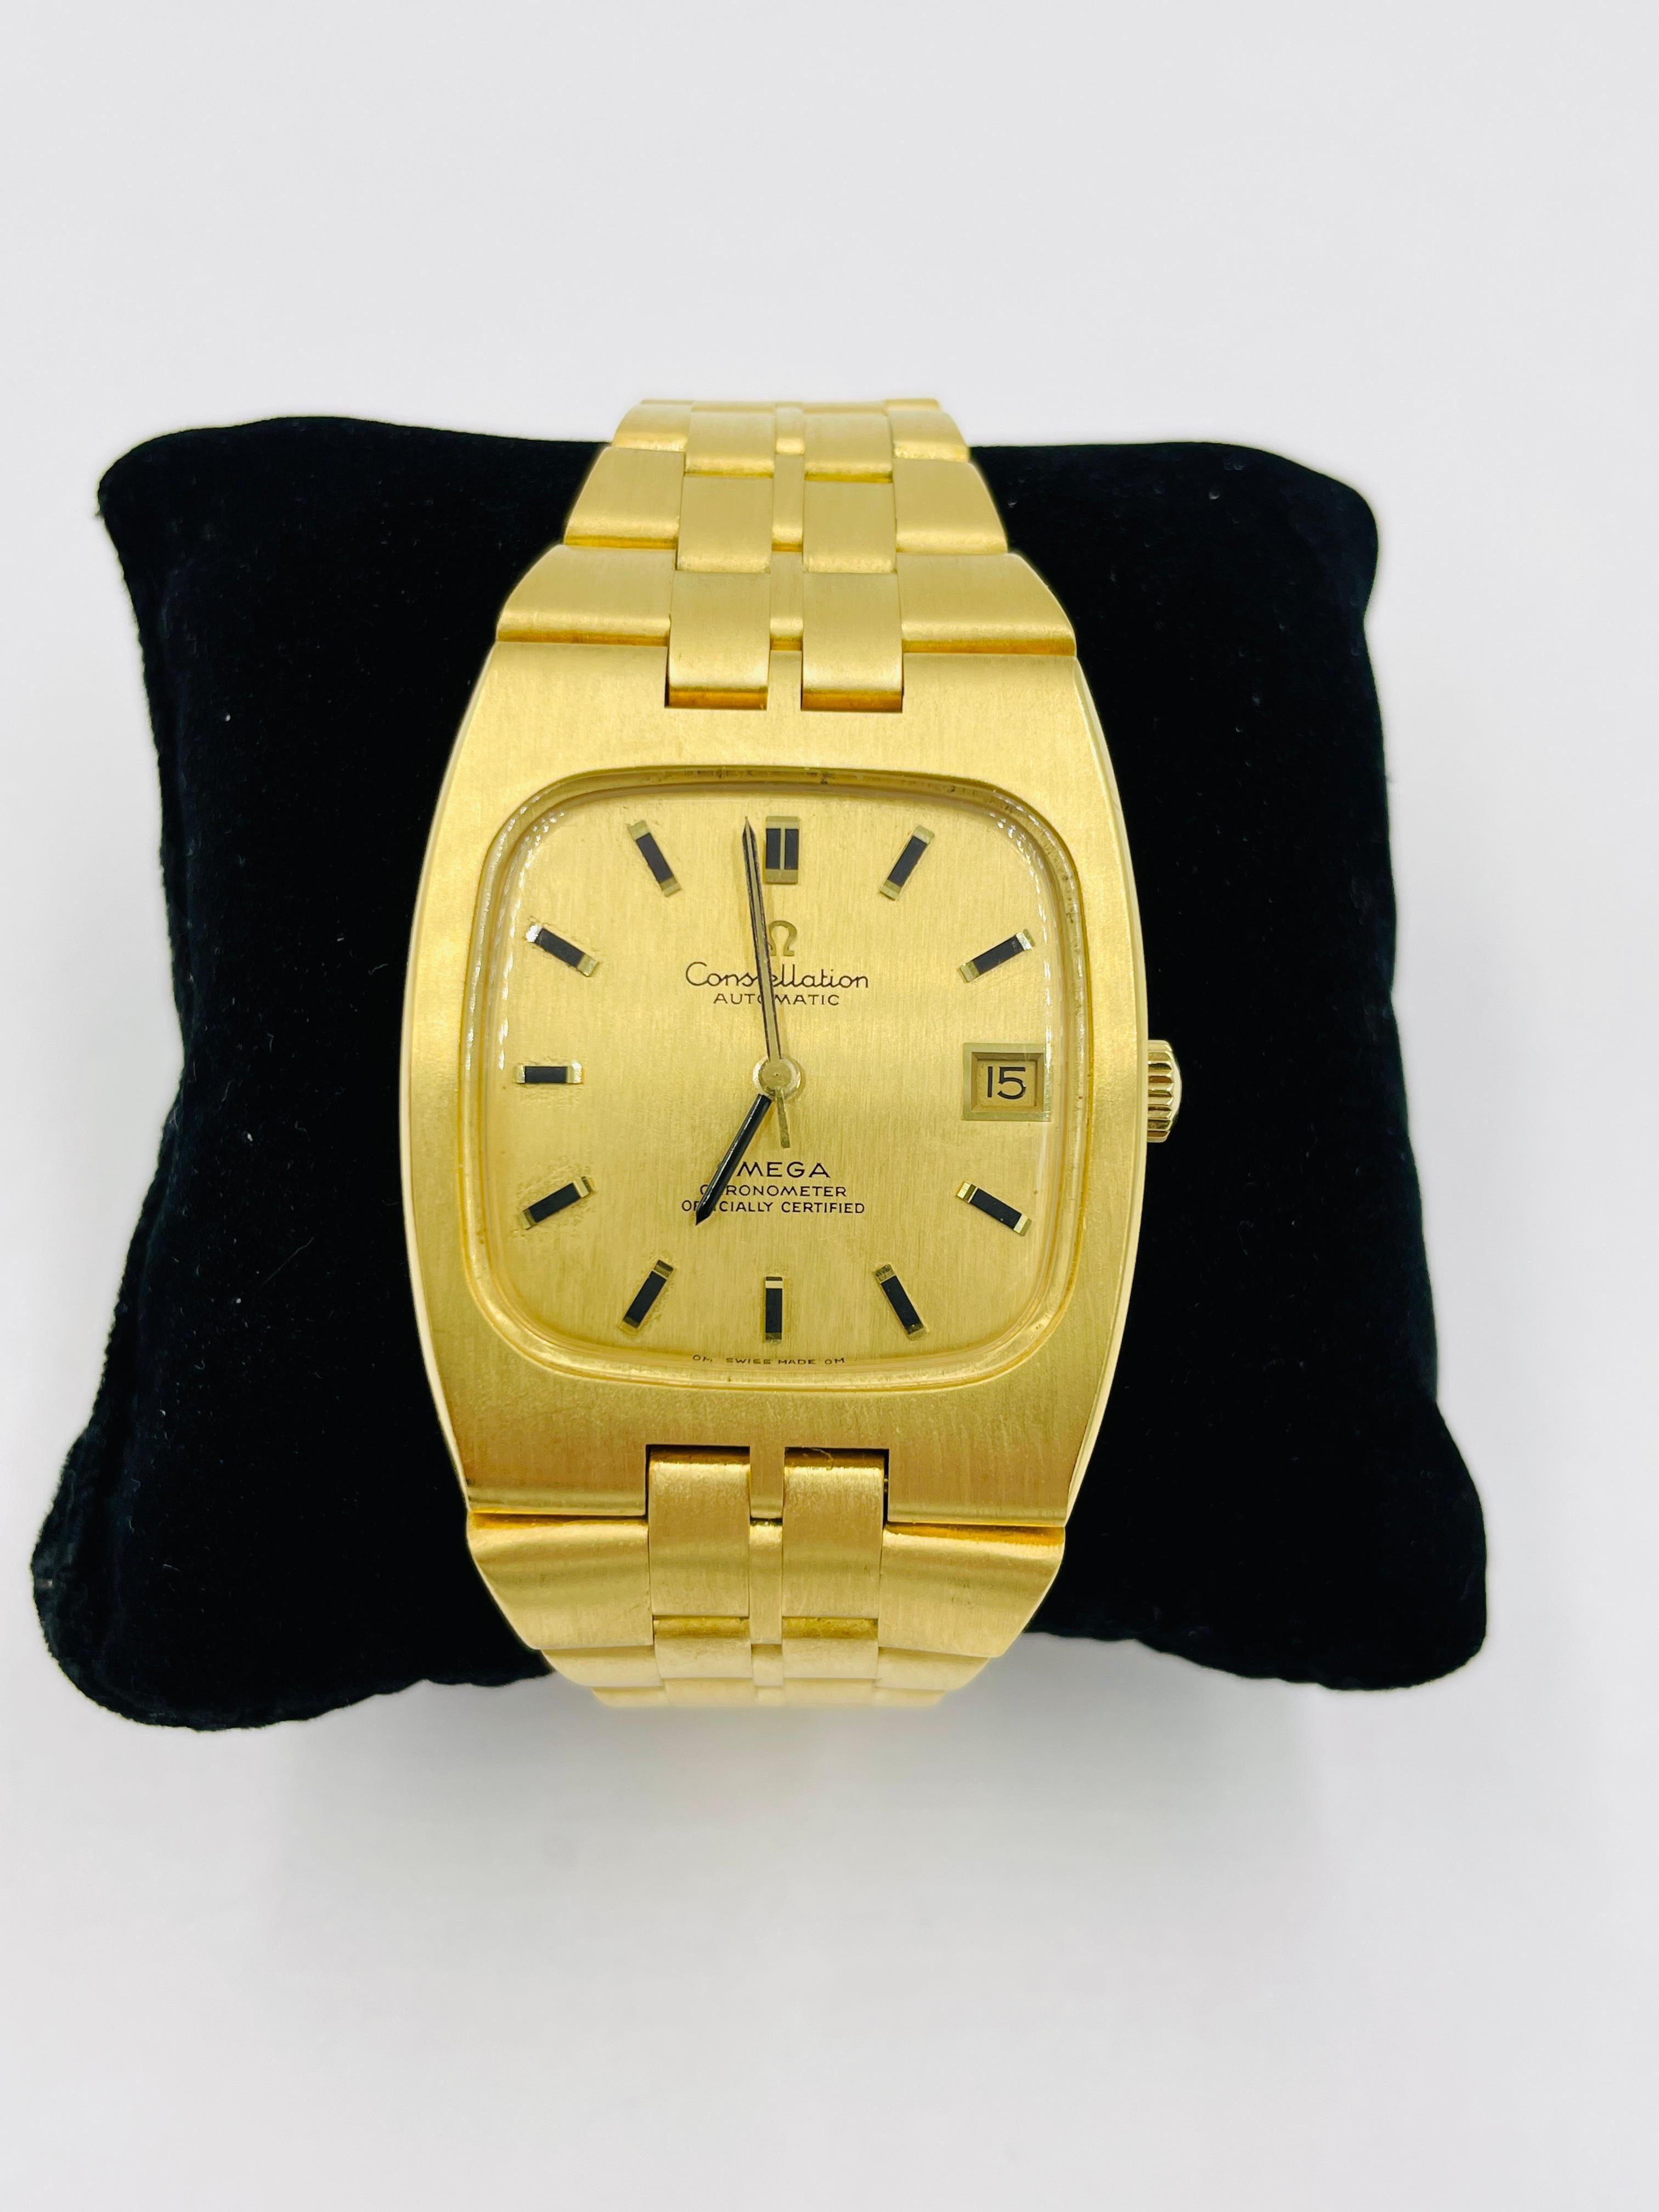 Vintage Omega Constellation 18k Yellow Gold Wristwatch, circa 1970s.

This is a rare Omega Constellation chronometer automatic XL case in solid 18k yellow gold. It is rare to find one in such great condition with minimal signs of wear.  The case is